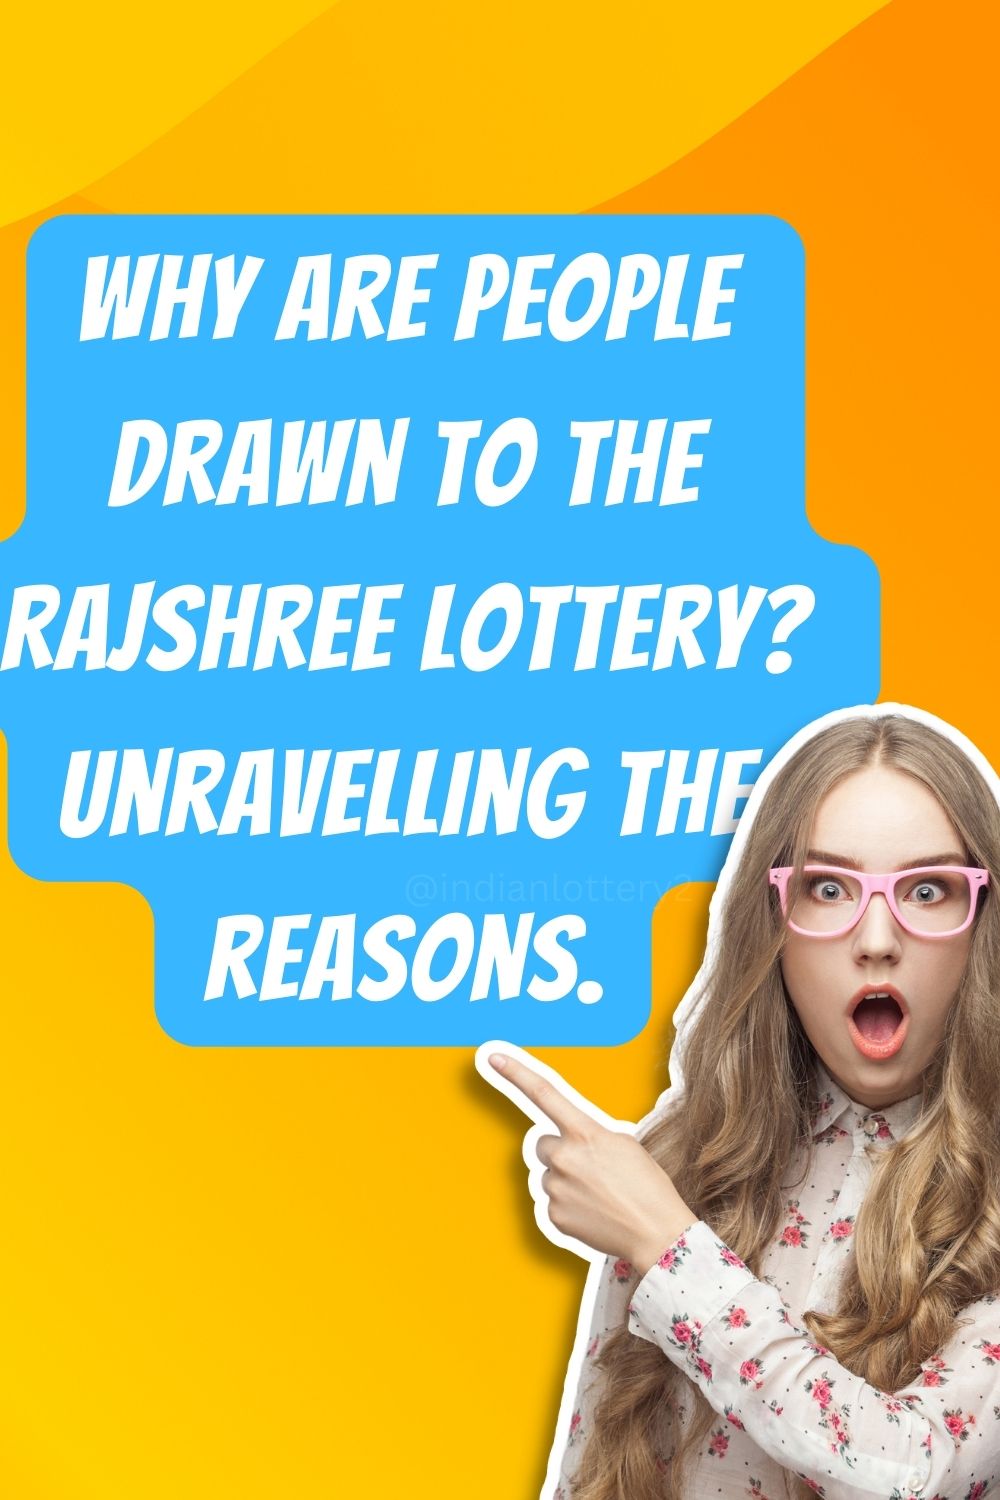 Why are people drawn to the Rajshree Lottery? Unravelling reasons.